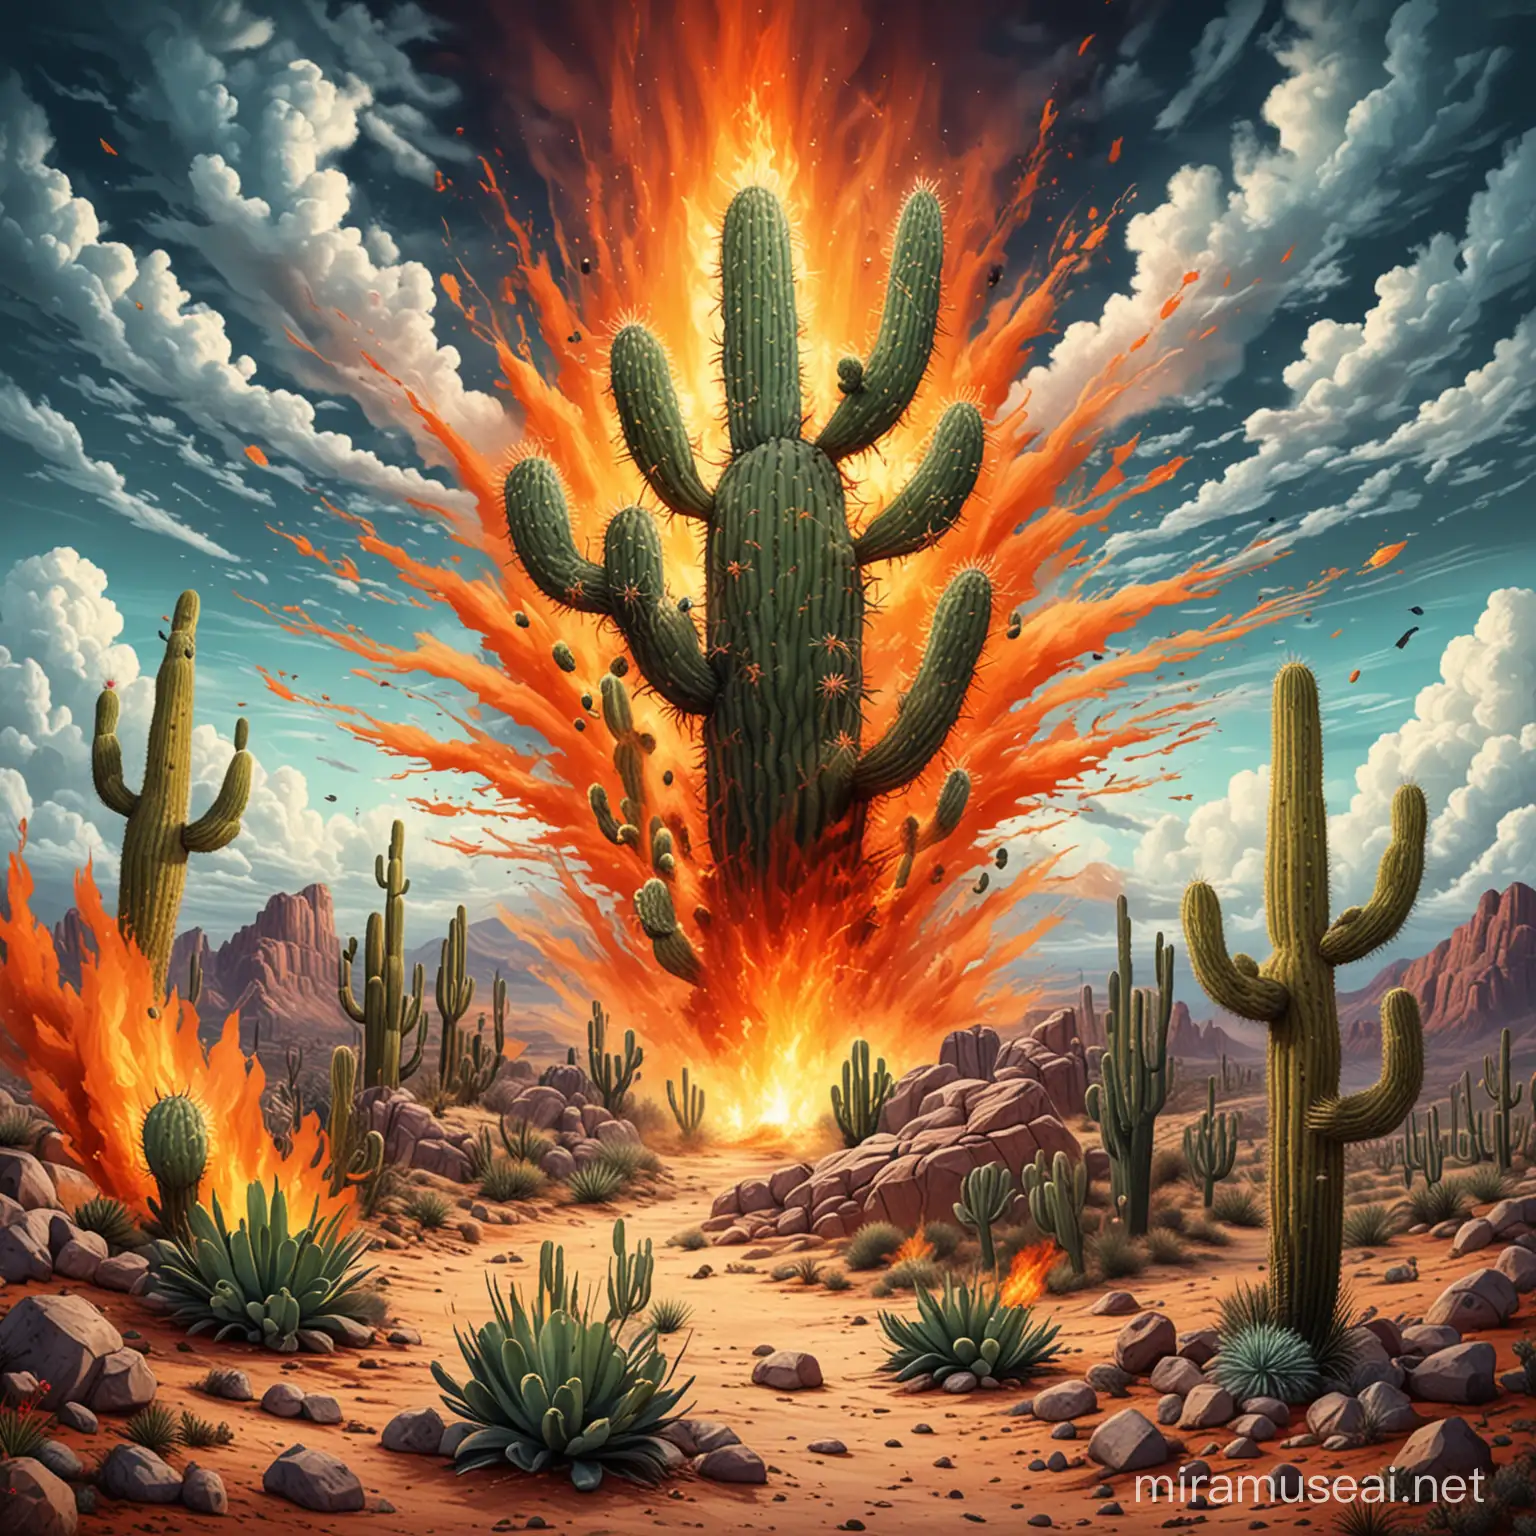 Whimsical Desert Landscape with Distorted Cacti and Vibrant Fire Illustration